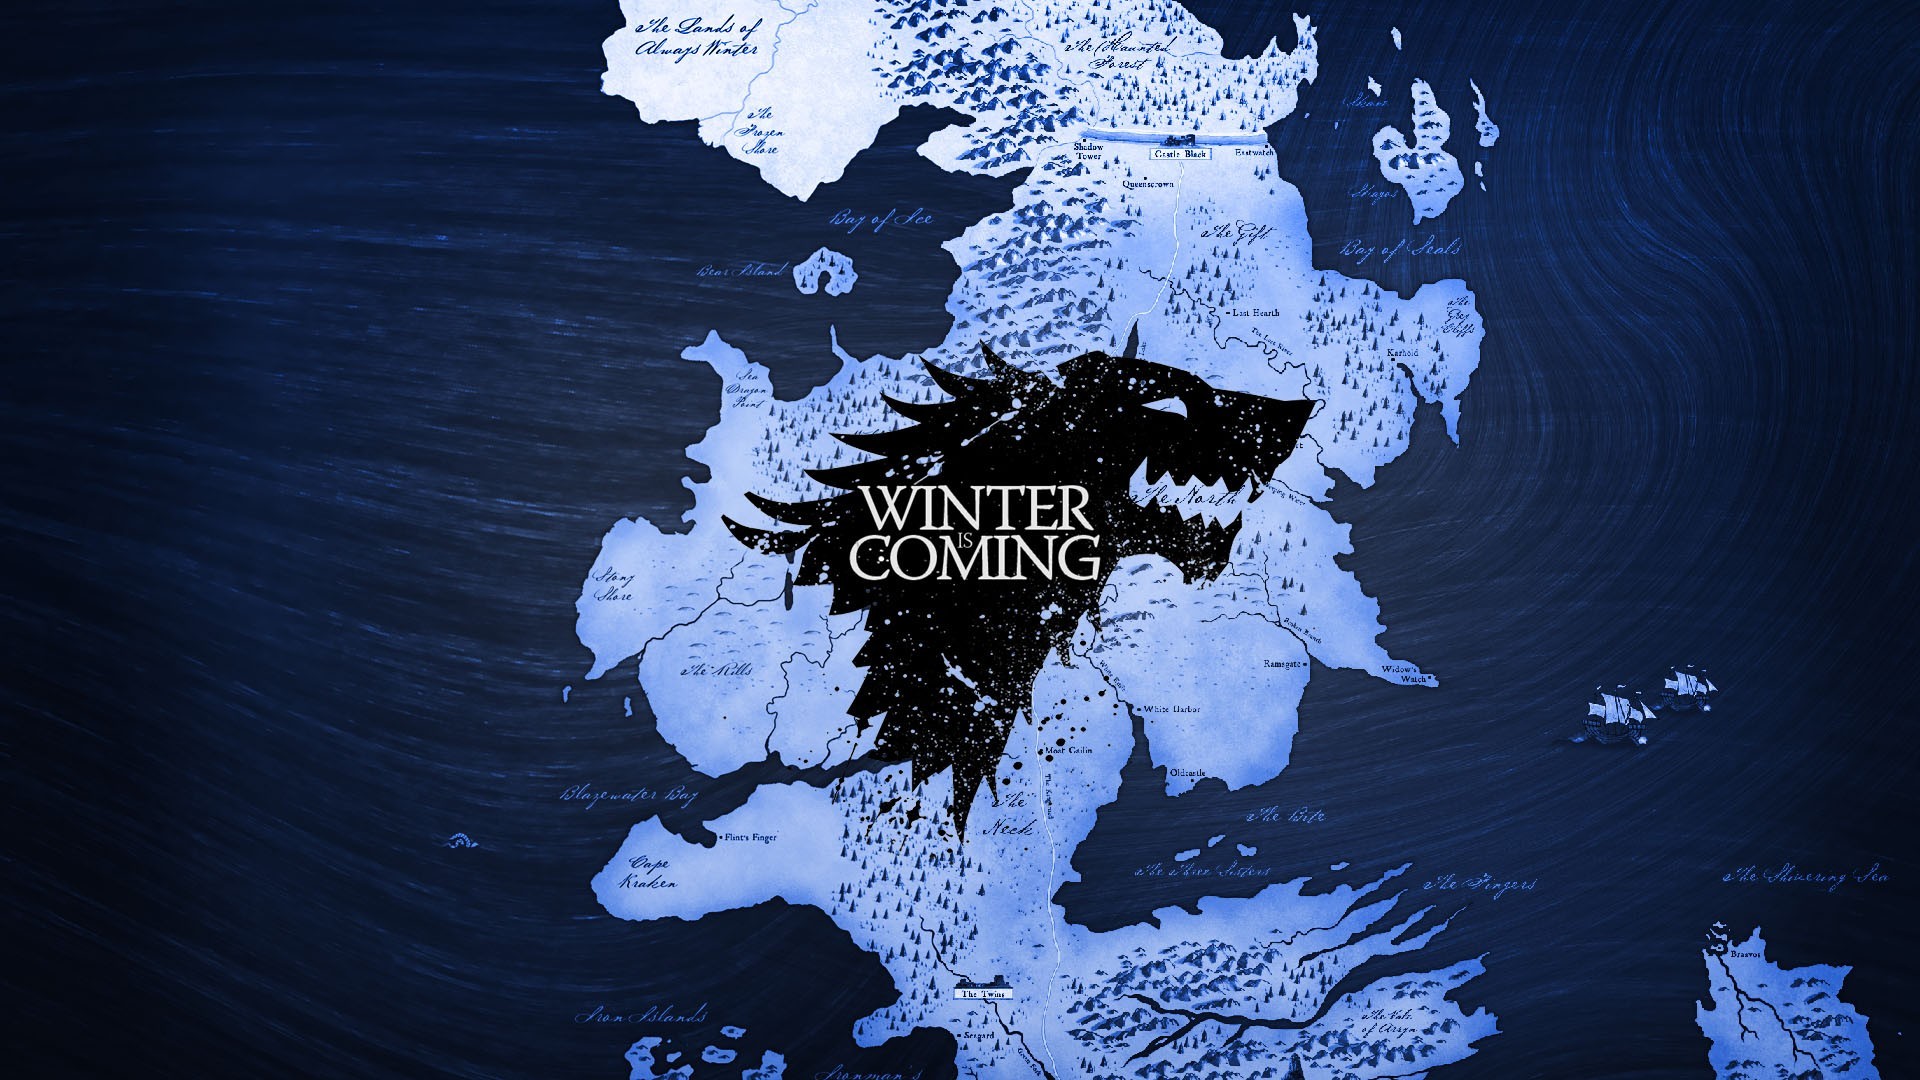 #Westeros, #A Song of Ice and Fire, #wolf, #Winterfell, #Winter Is Coming, #House Stark, #map, #Game of Thrones, wallpaper HD Wallpaper